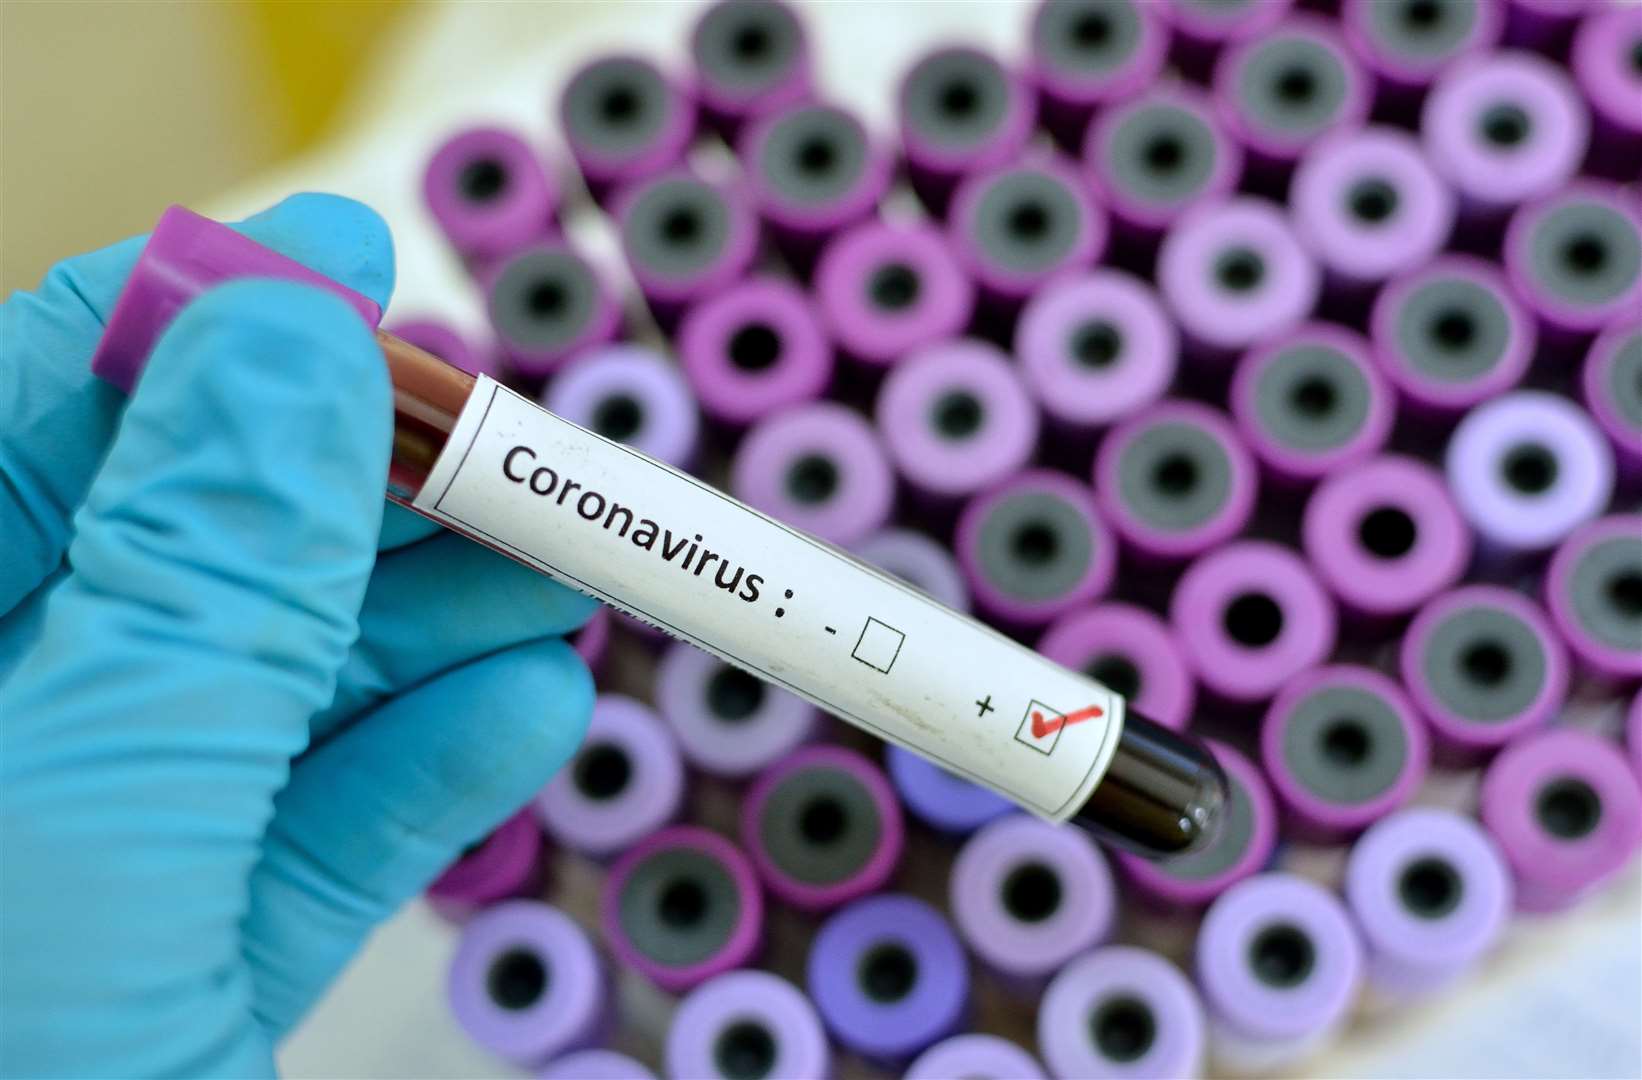 A committee of MPs has criticised the government's Covid-19 testing programme as slow and inadequate